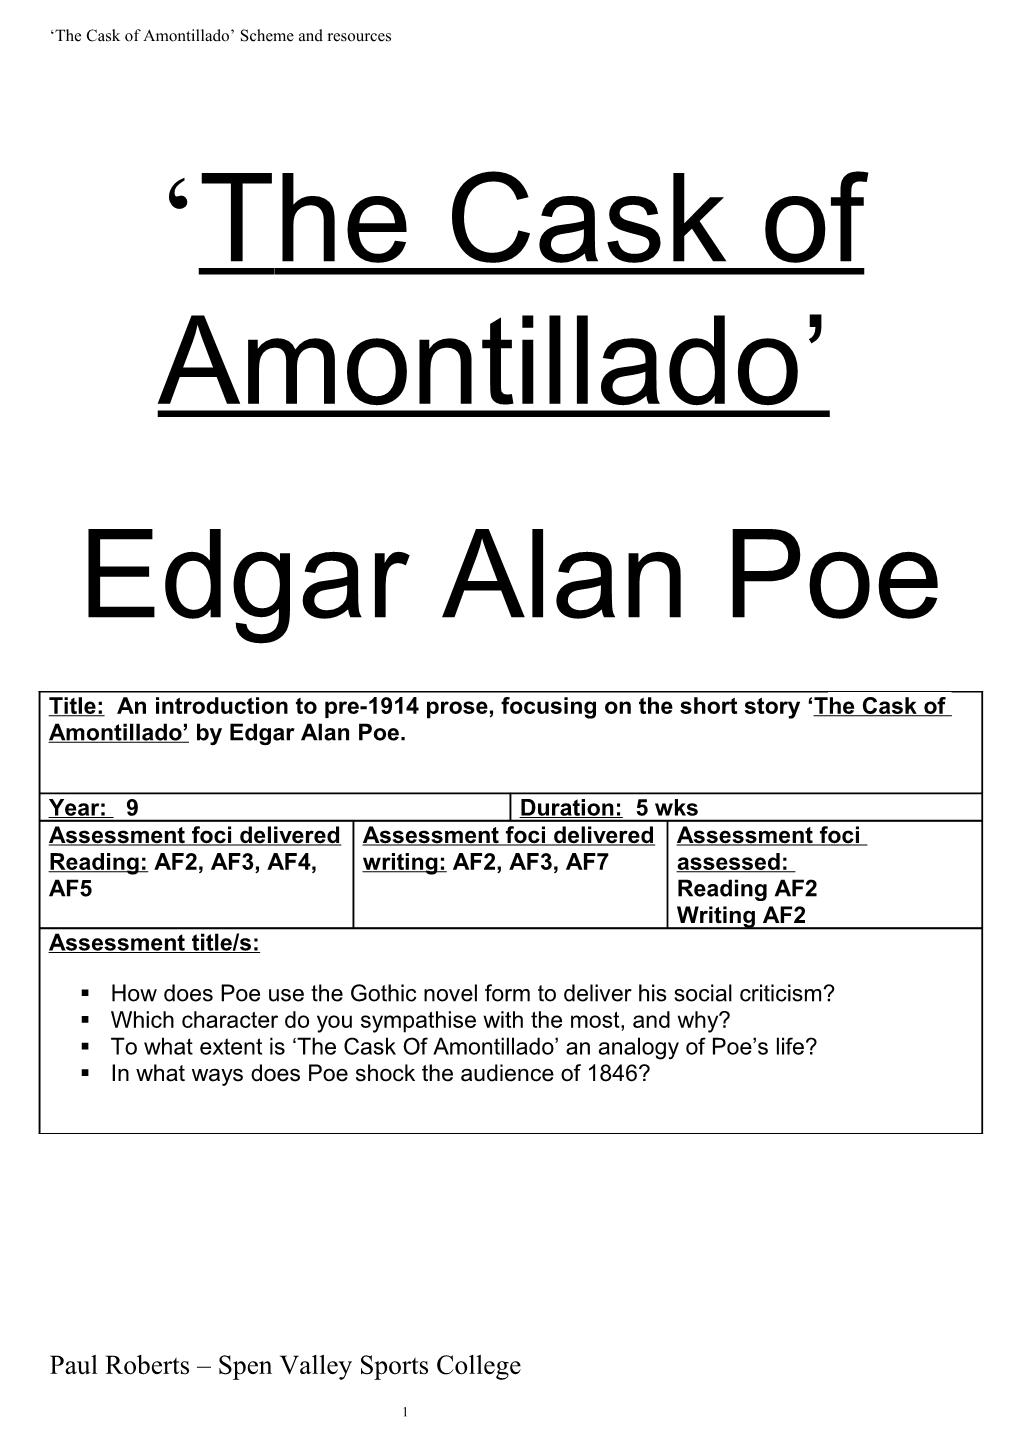 The Cask of Amontillado Scheme and Resources